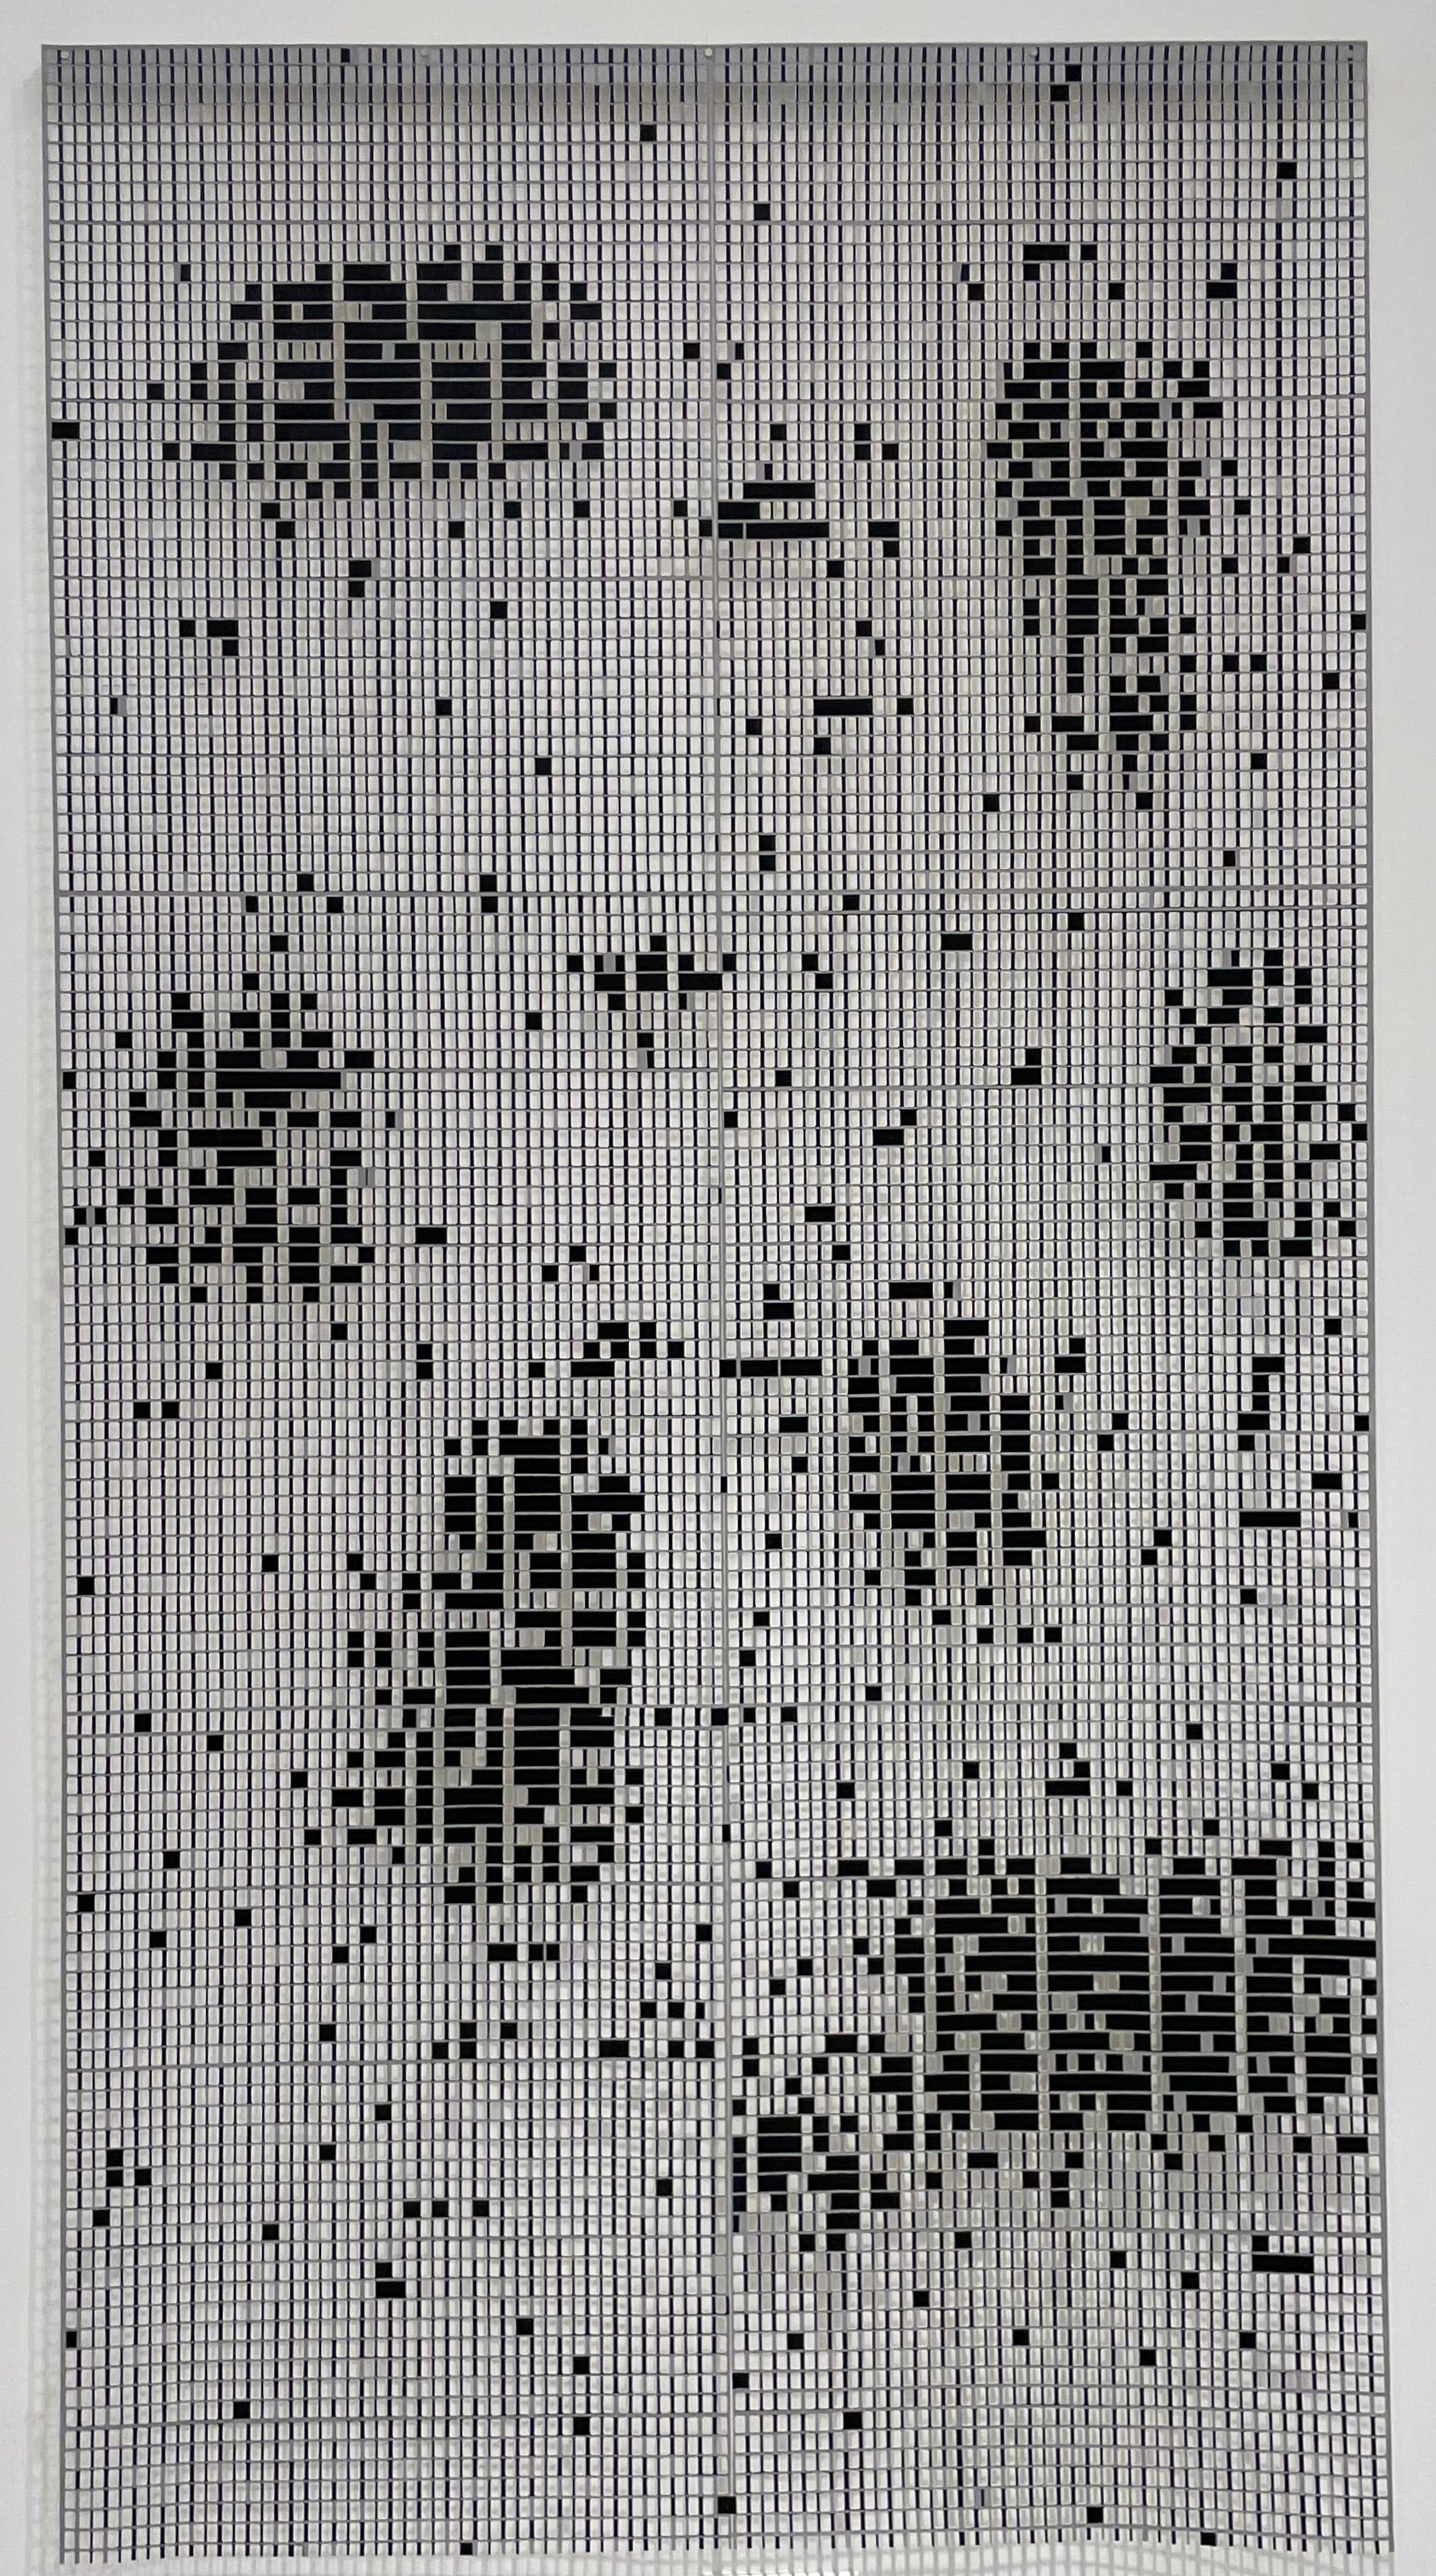 Jane Lackey, Friction 1, 2018, acrylic paint, labels, hand cut kozo paper, wood hanger,  72 x 39 in.